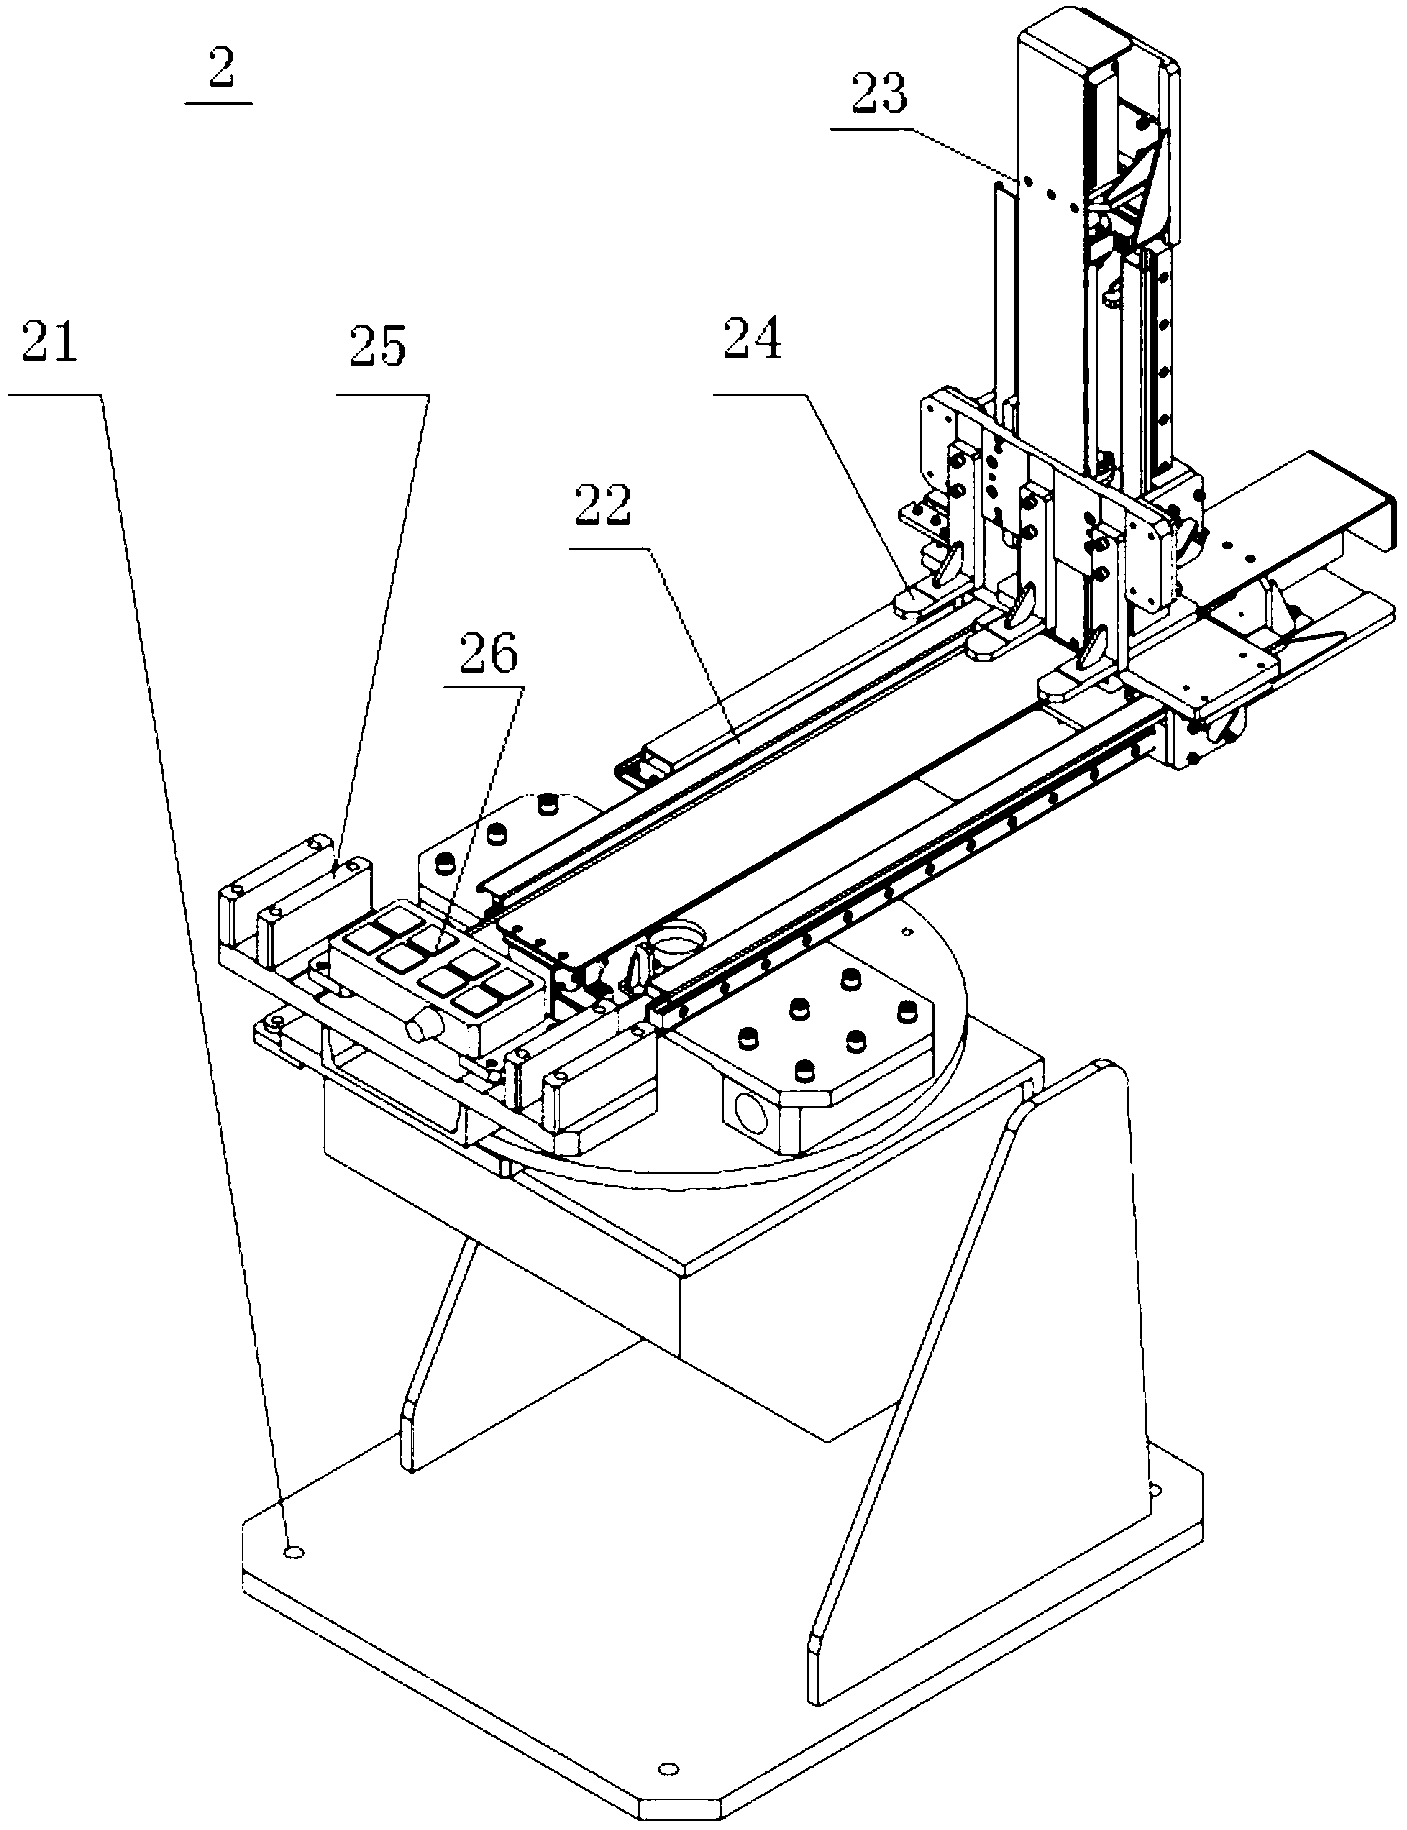 Automatic assembling and welding system based on three-dimensional laser vision